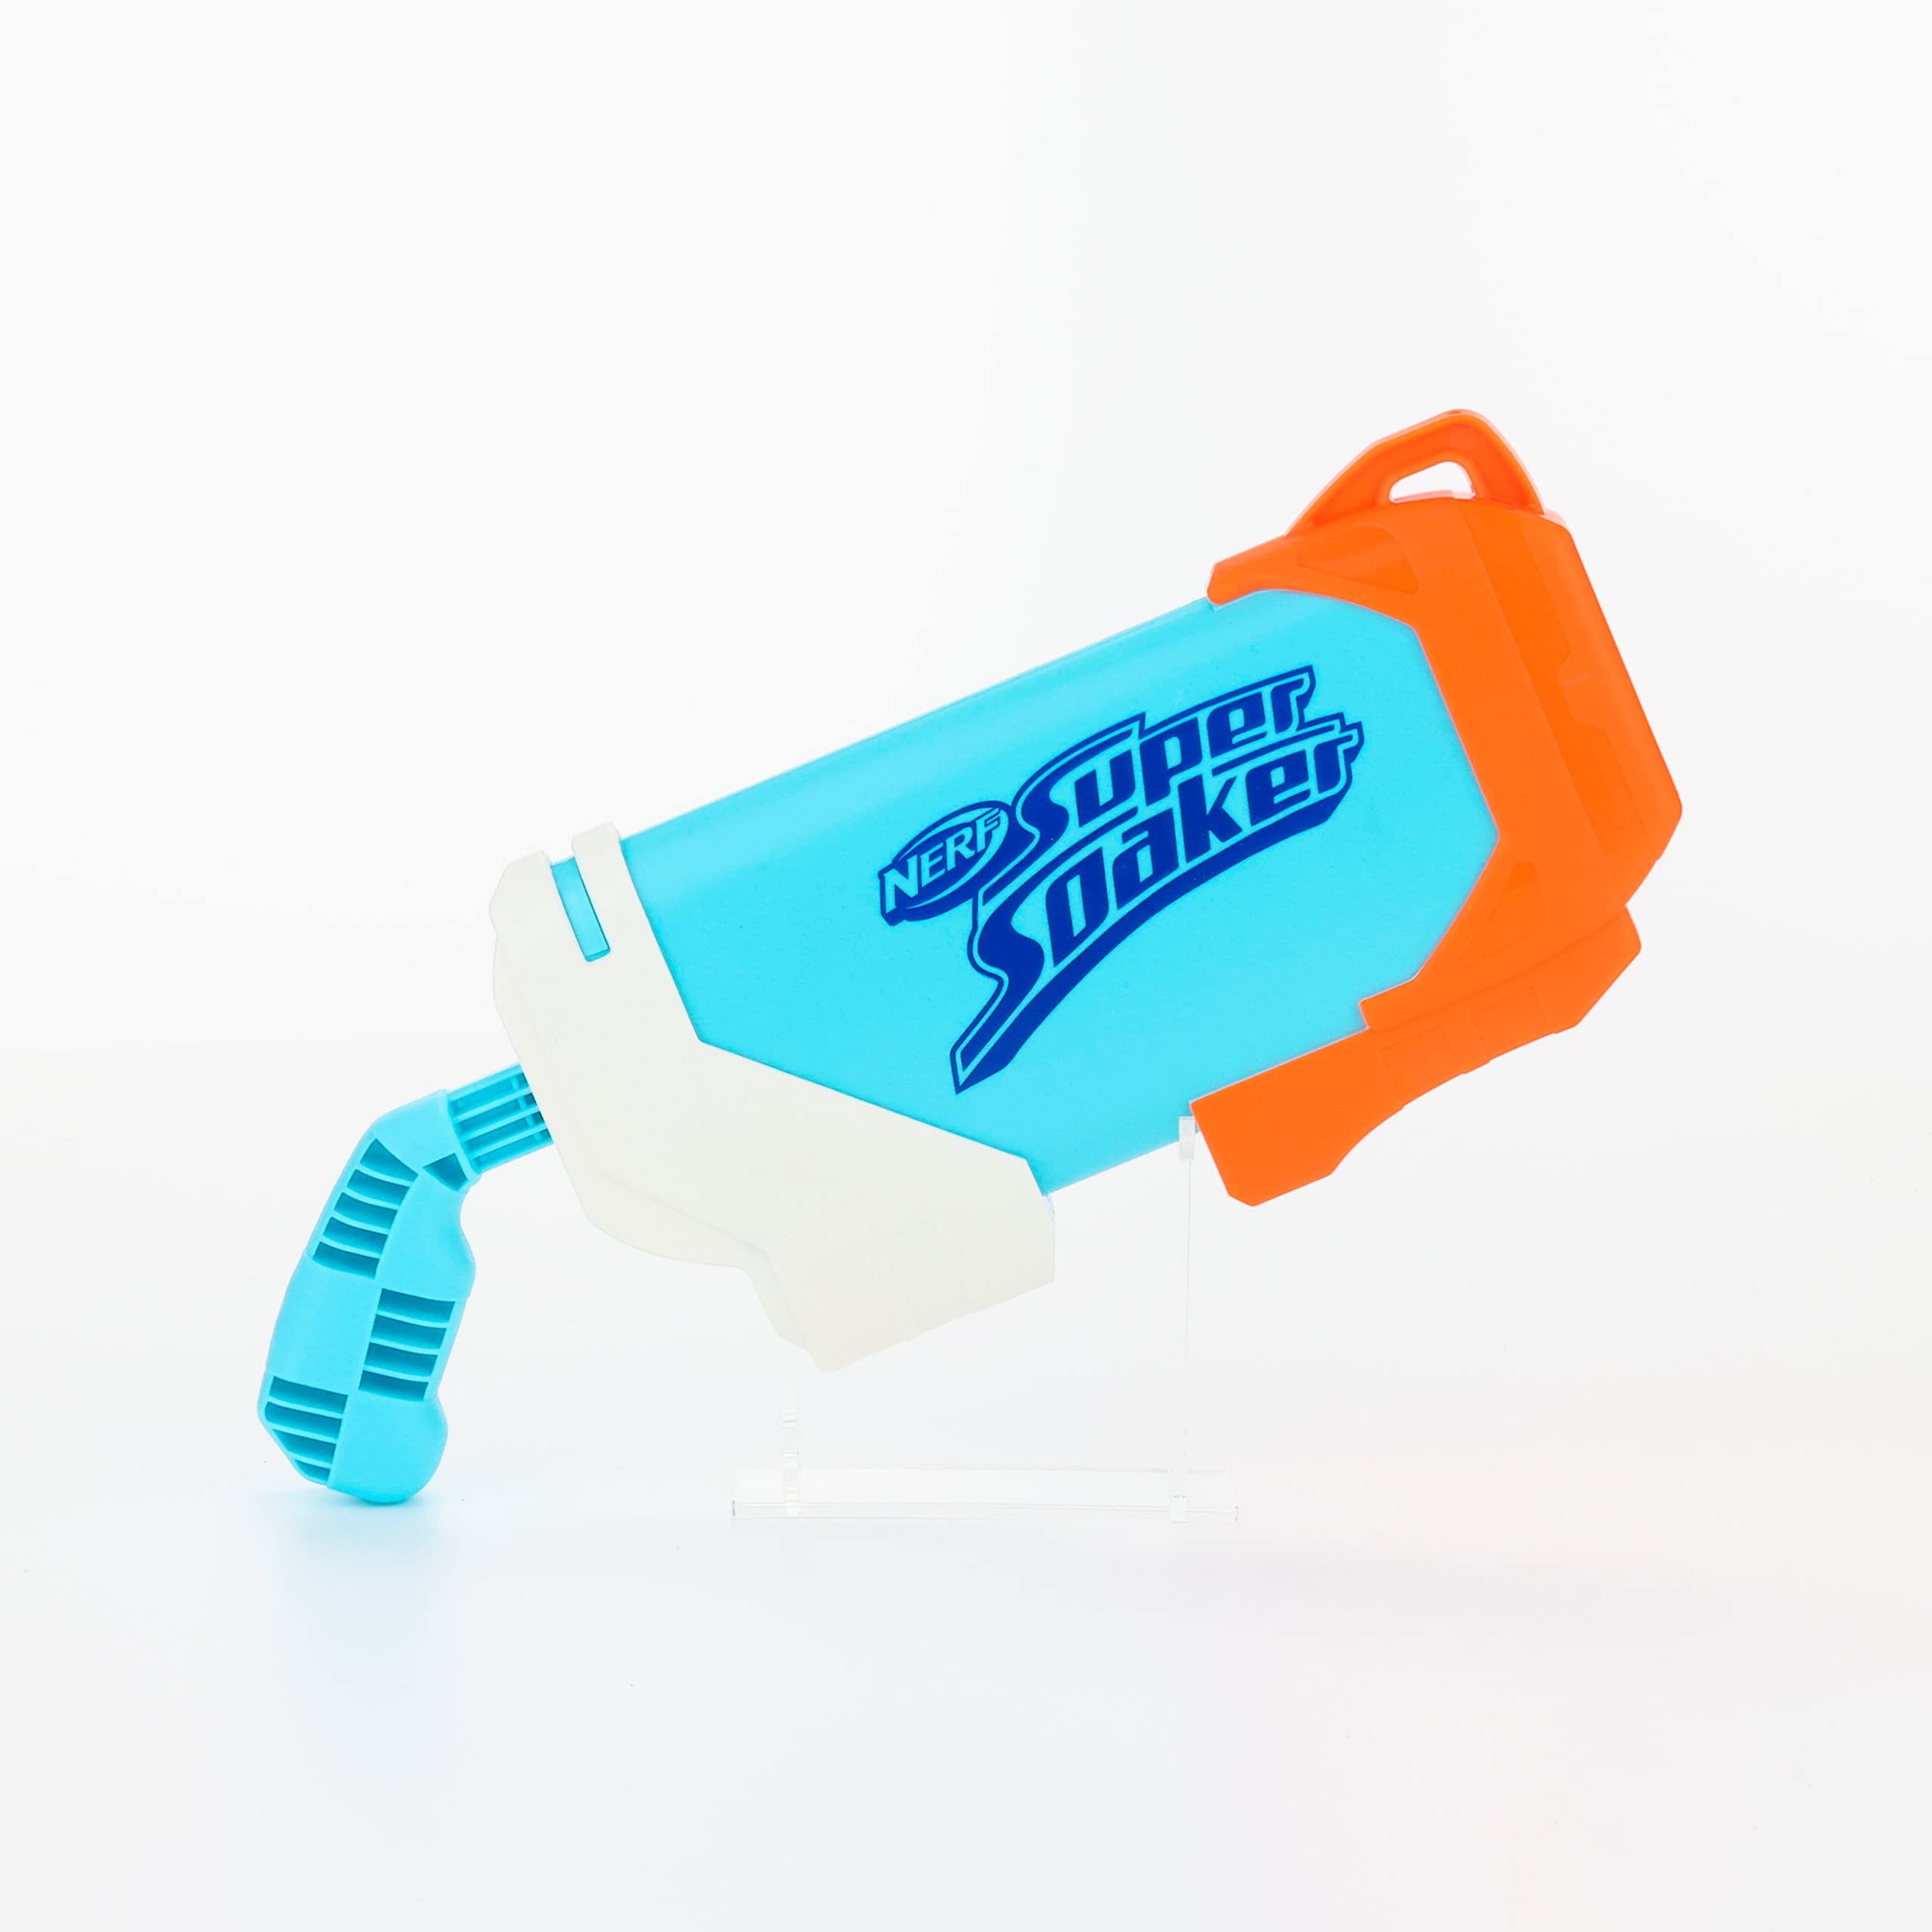 Nerf Super Soaker Torrent Water Blaster, Pump to Fire a Flooding Blast of Water, Outdoor Water-Blasting Fun for Kids Teens Adults